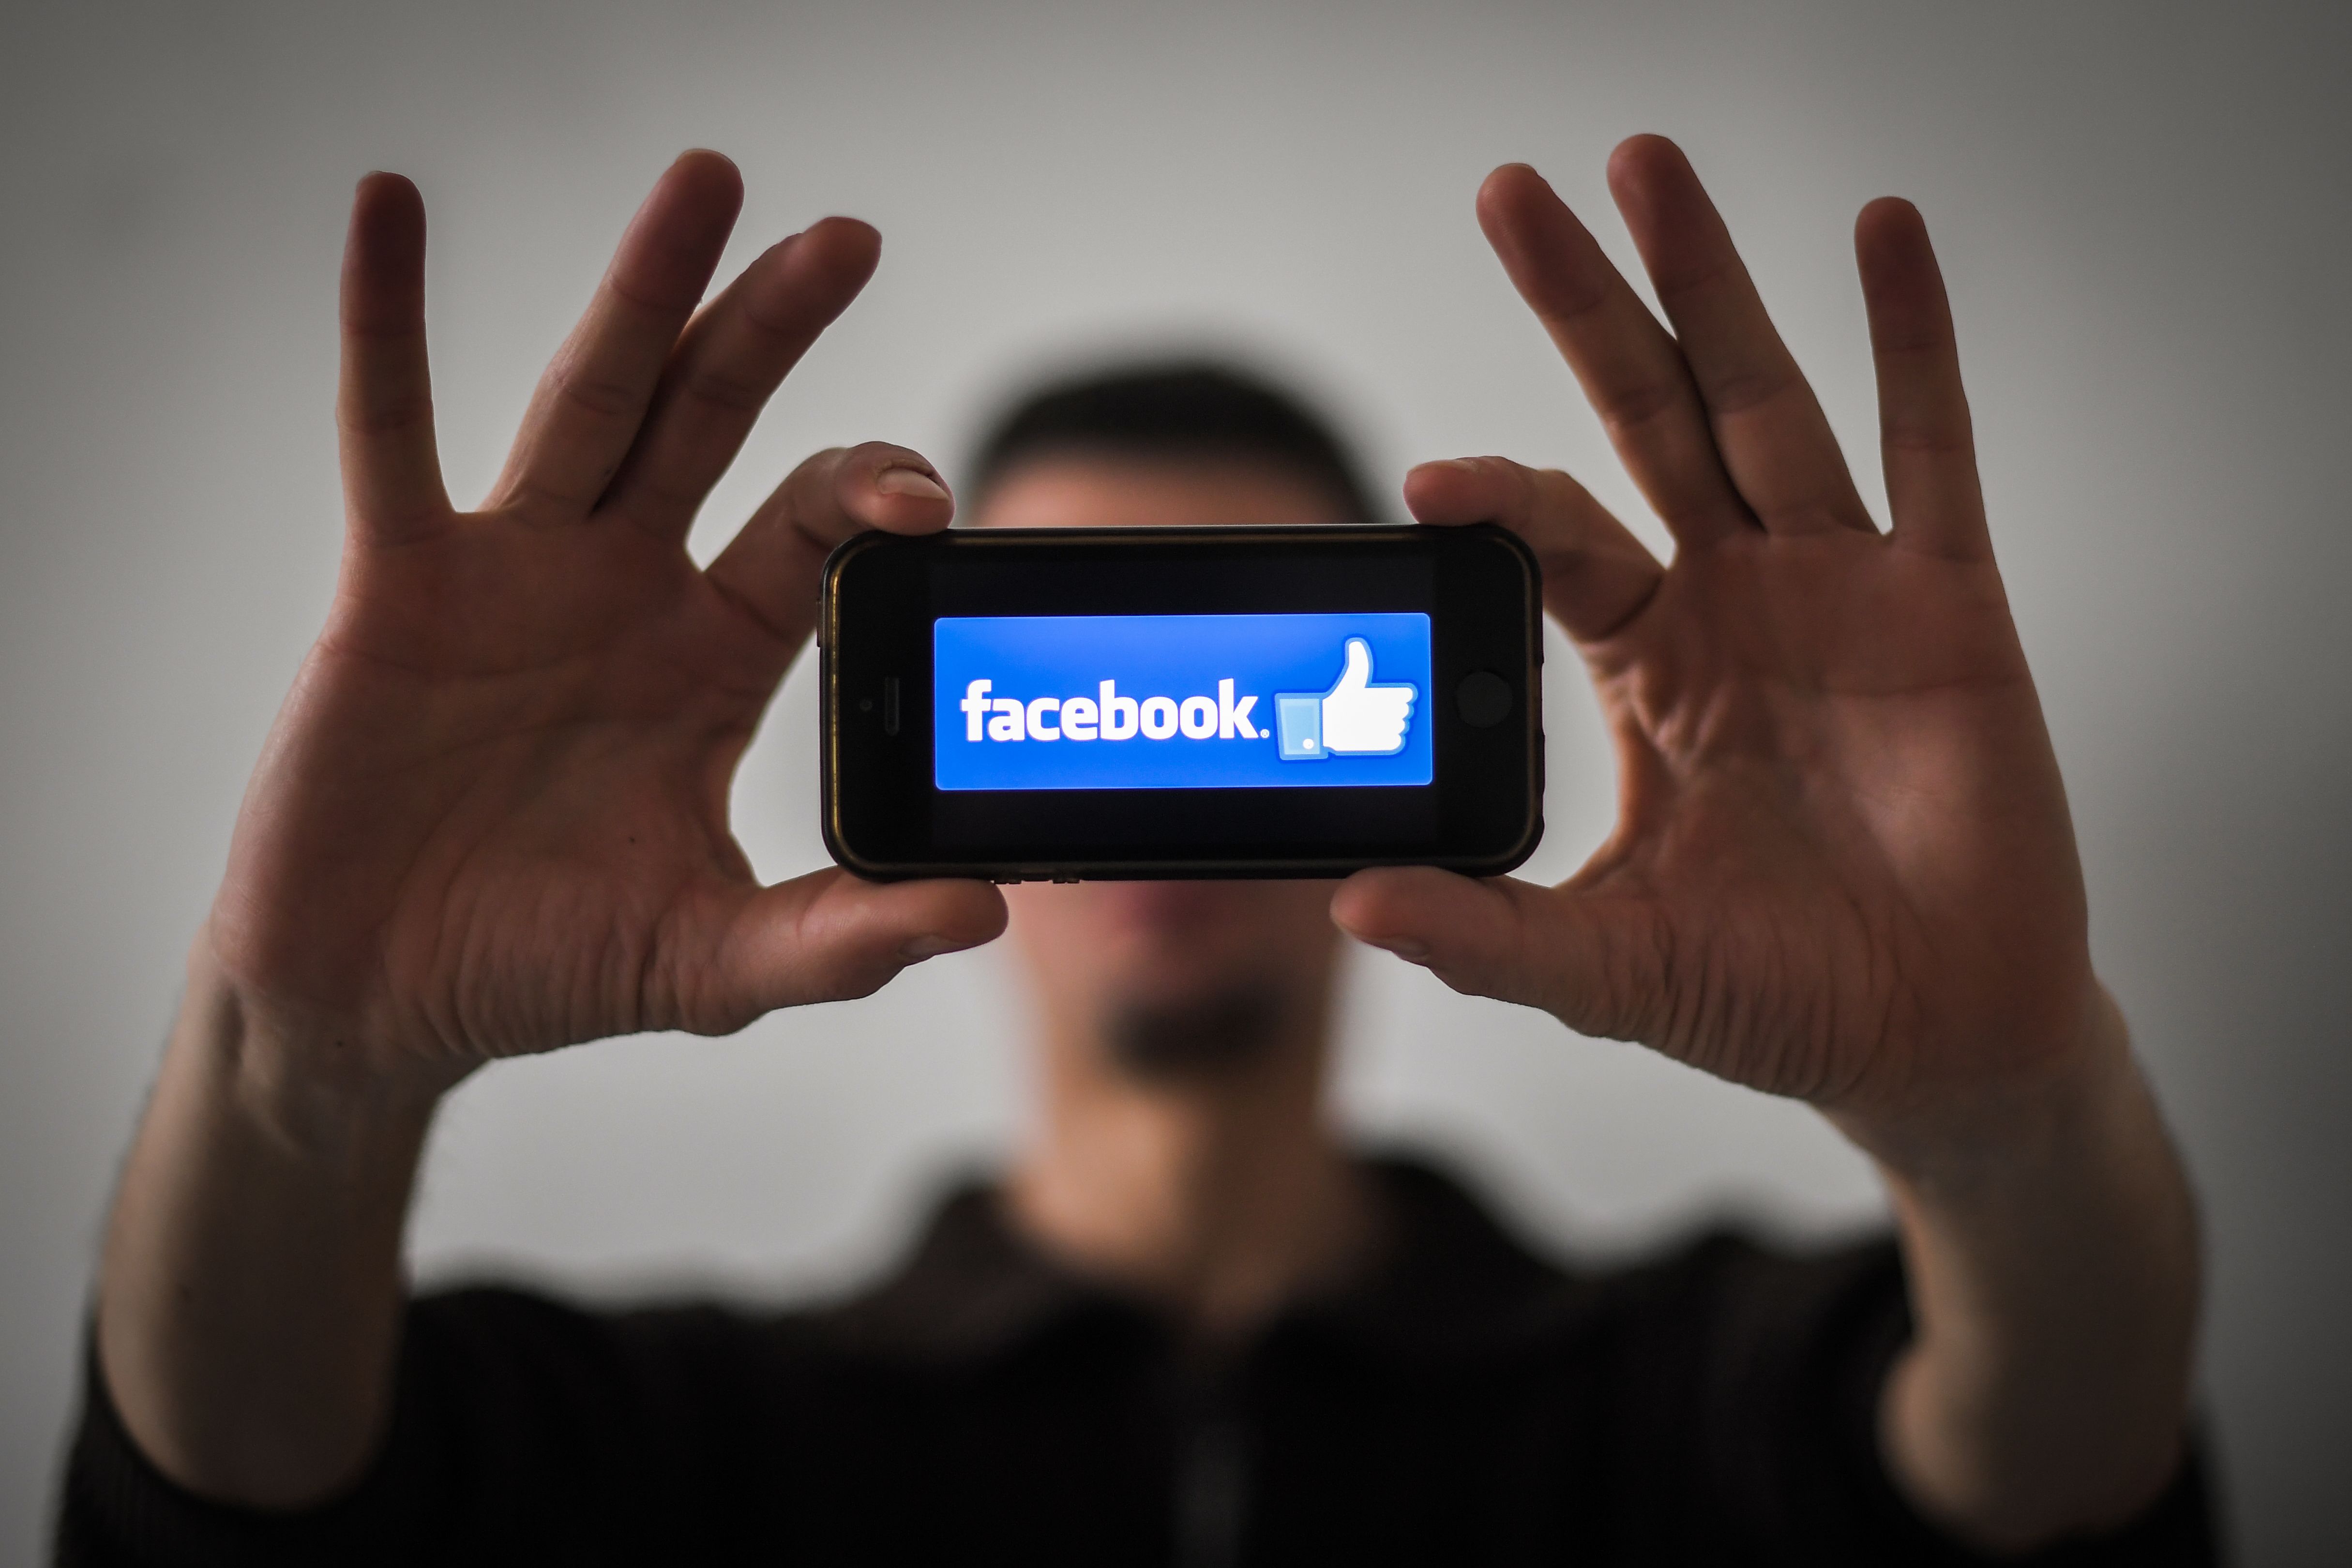 A man shows the logo of social network Facebook displayed on a smartphone, on January 15, 2019 in Nantes, western France. (LOIC VENANCE/AFP/Getty Images)